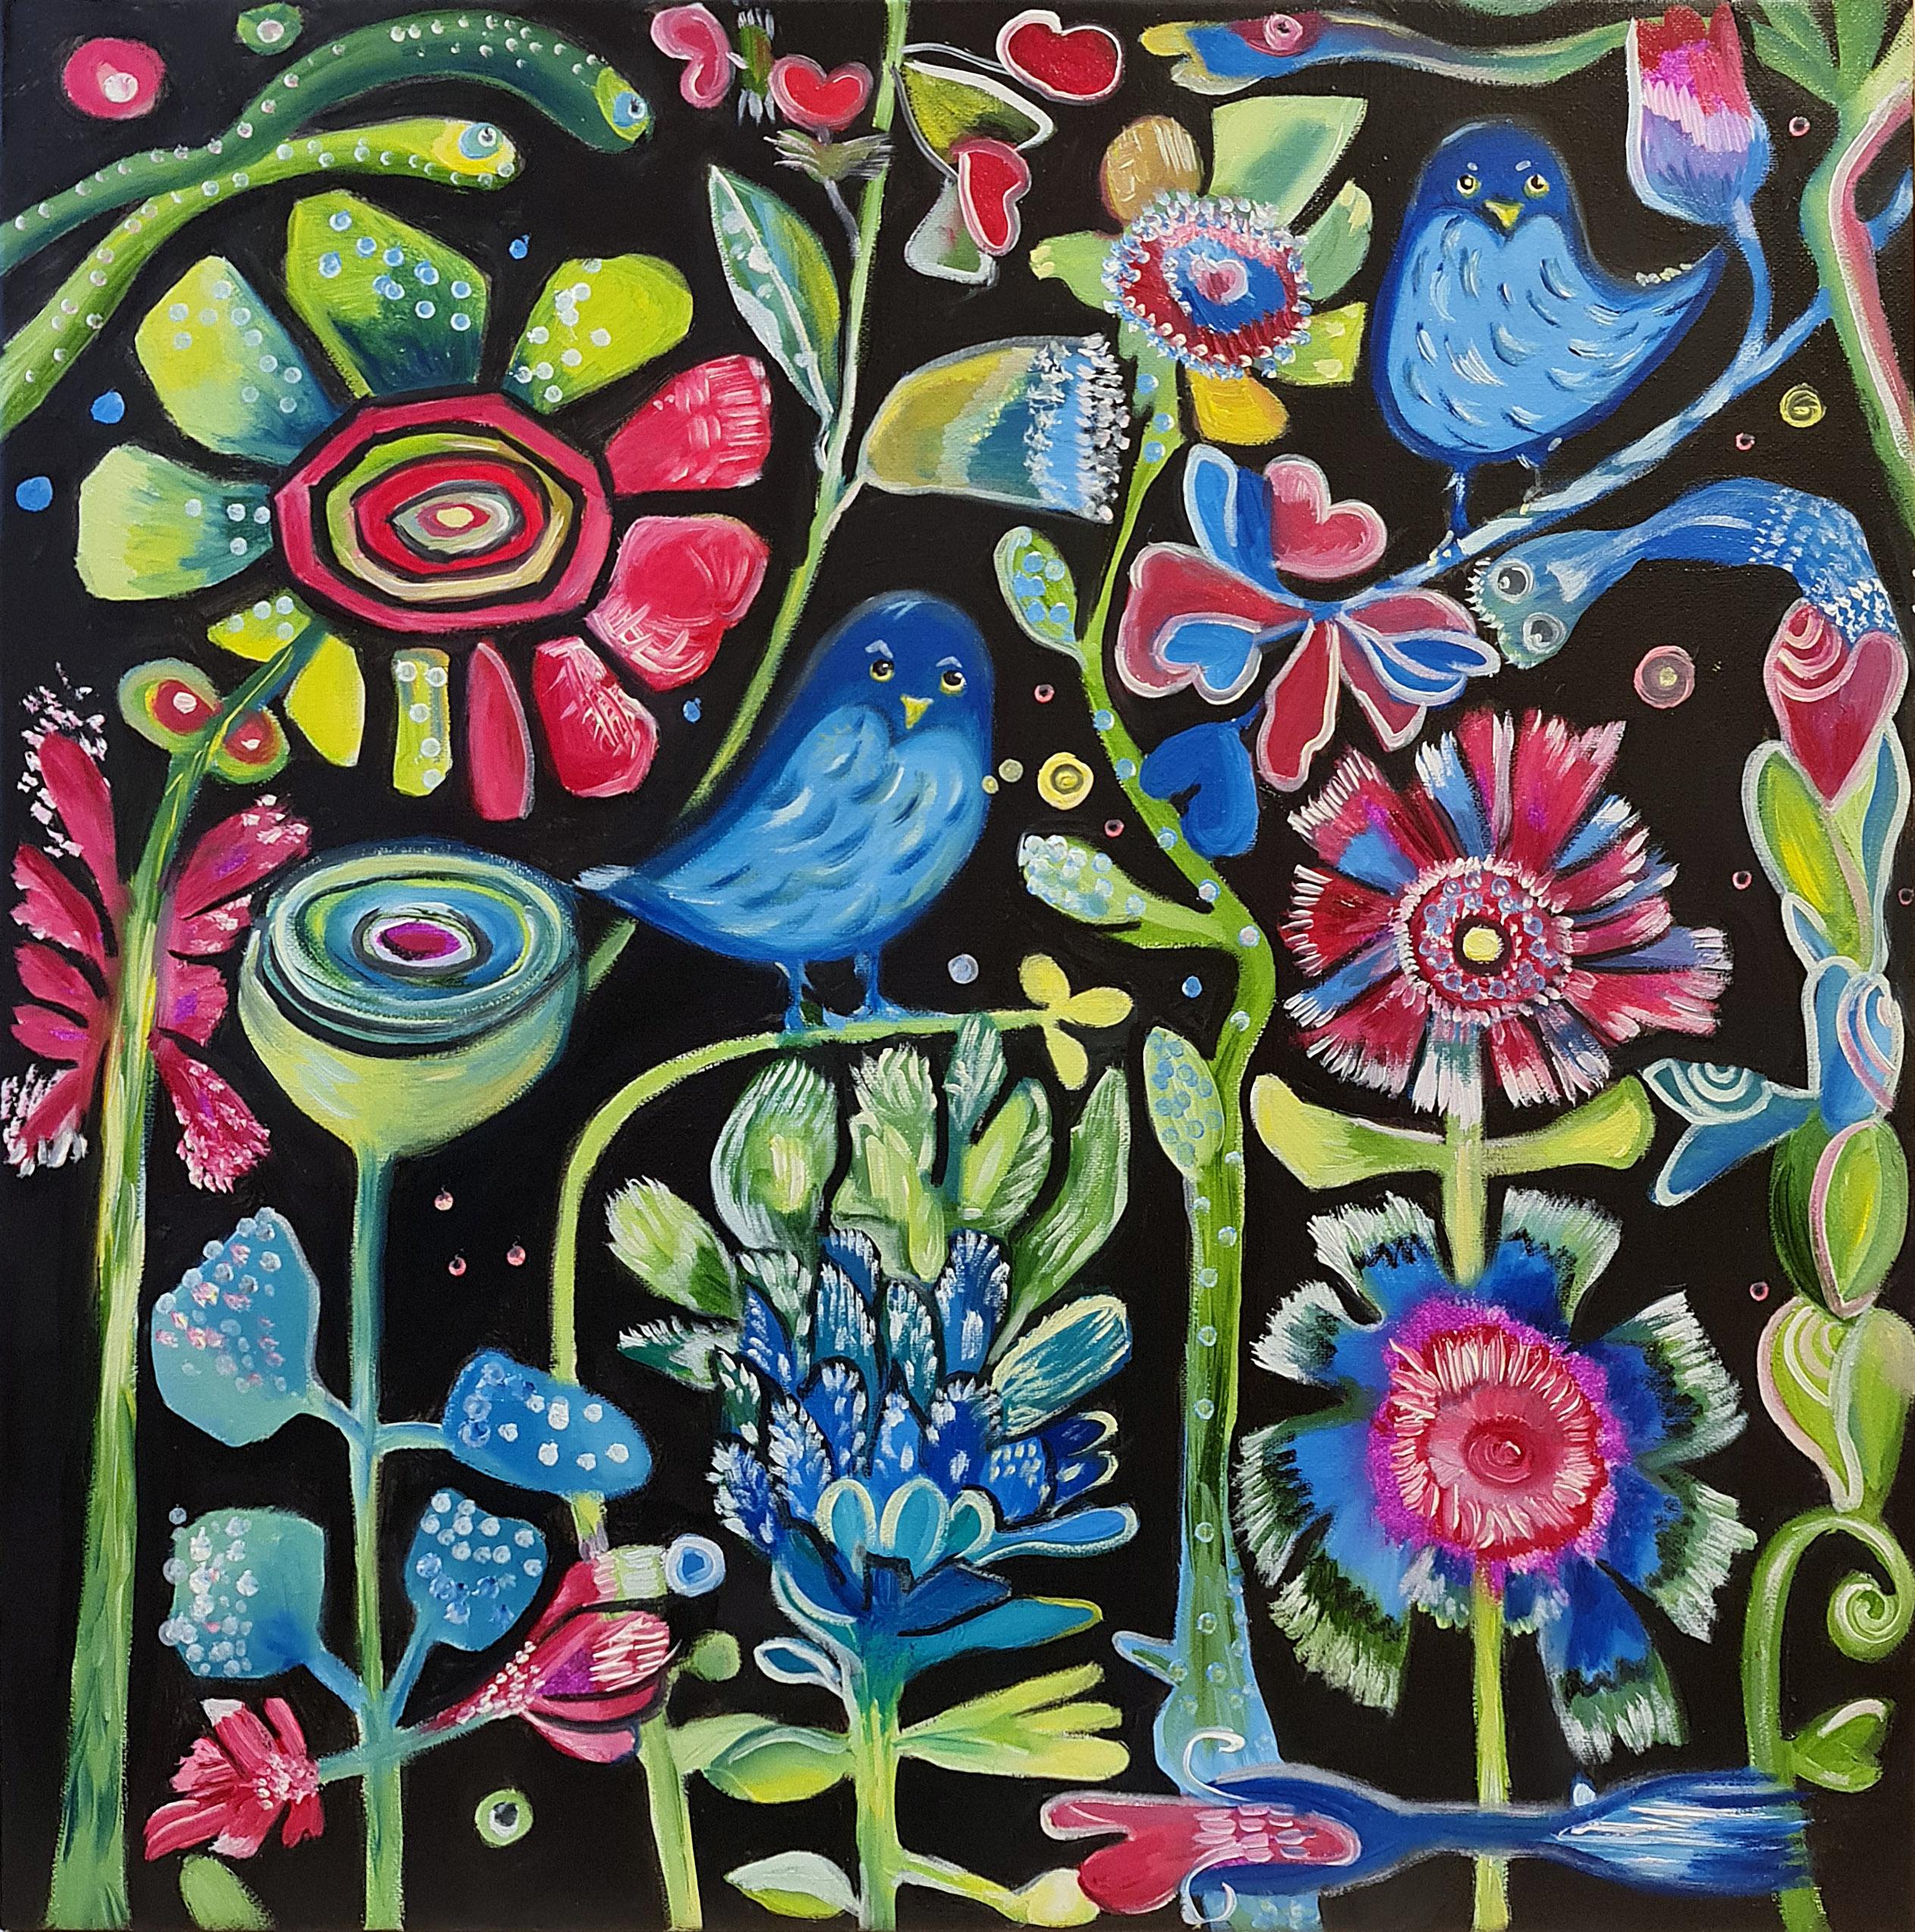 The paintings are drawn with oil on the canvas.
Midnight in the magic garden. Hurray! The series of paintings "My funny birds" continues. Bright contrasts. Fancy flowers. Each of them comes to life as soon as midnight strikes. And the main